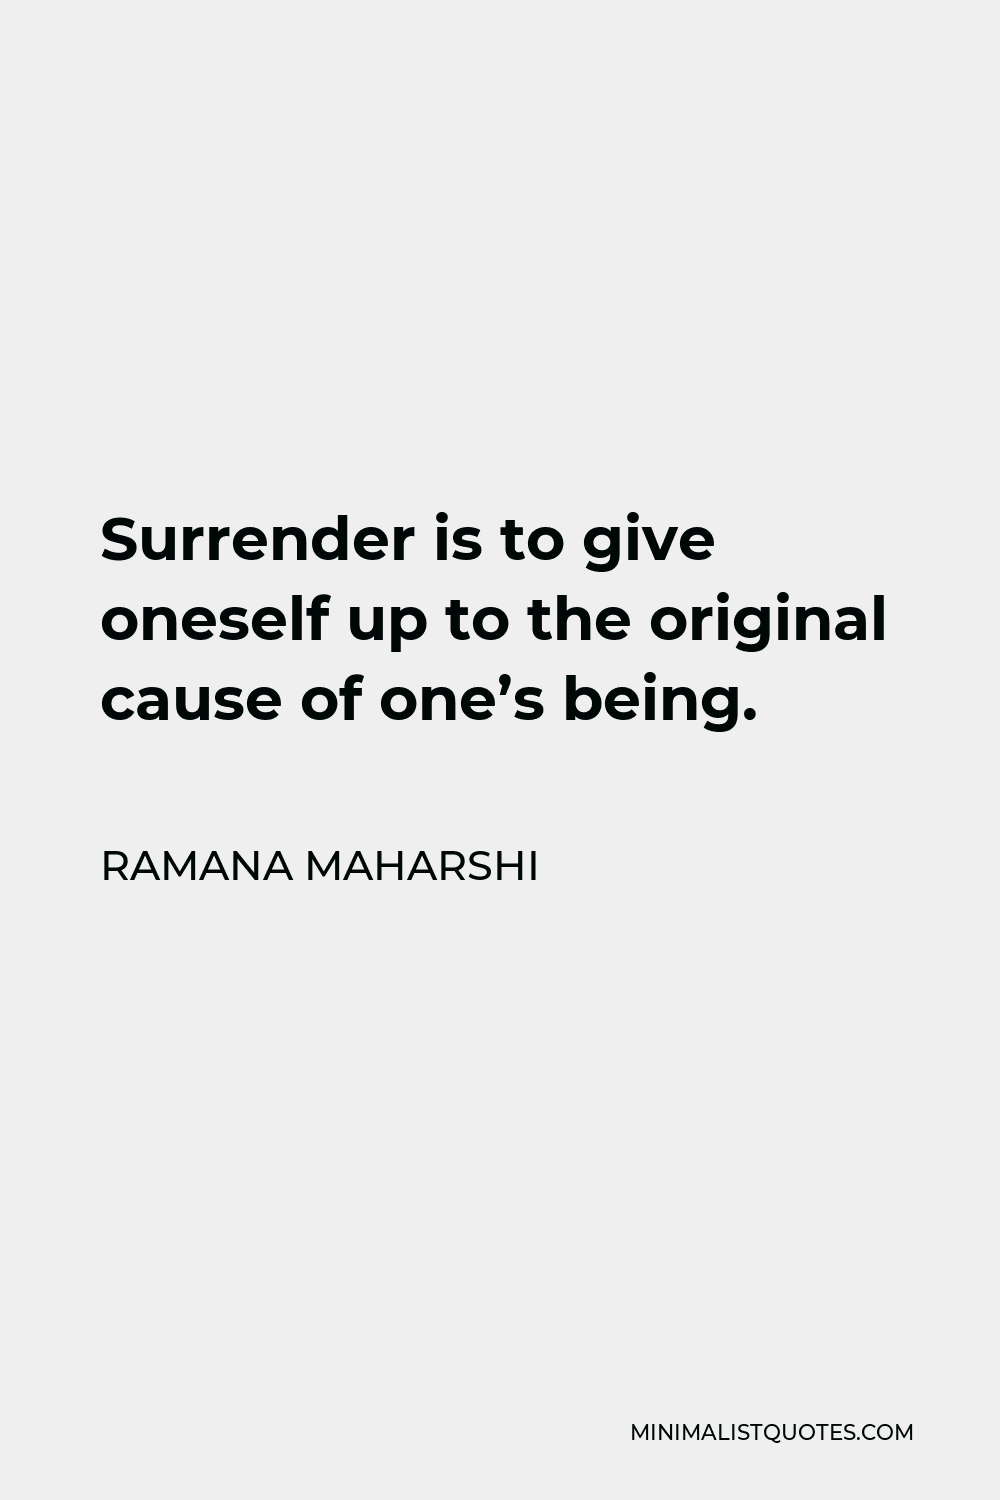 Ramana Maharshi Quote - Surrender is to give oneself up to the original cause of one’s being.